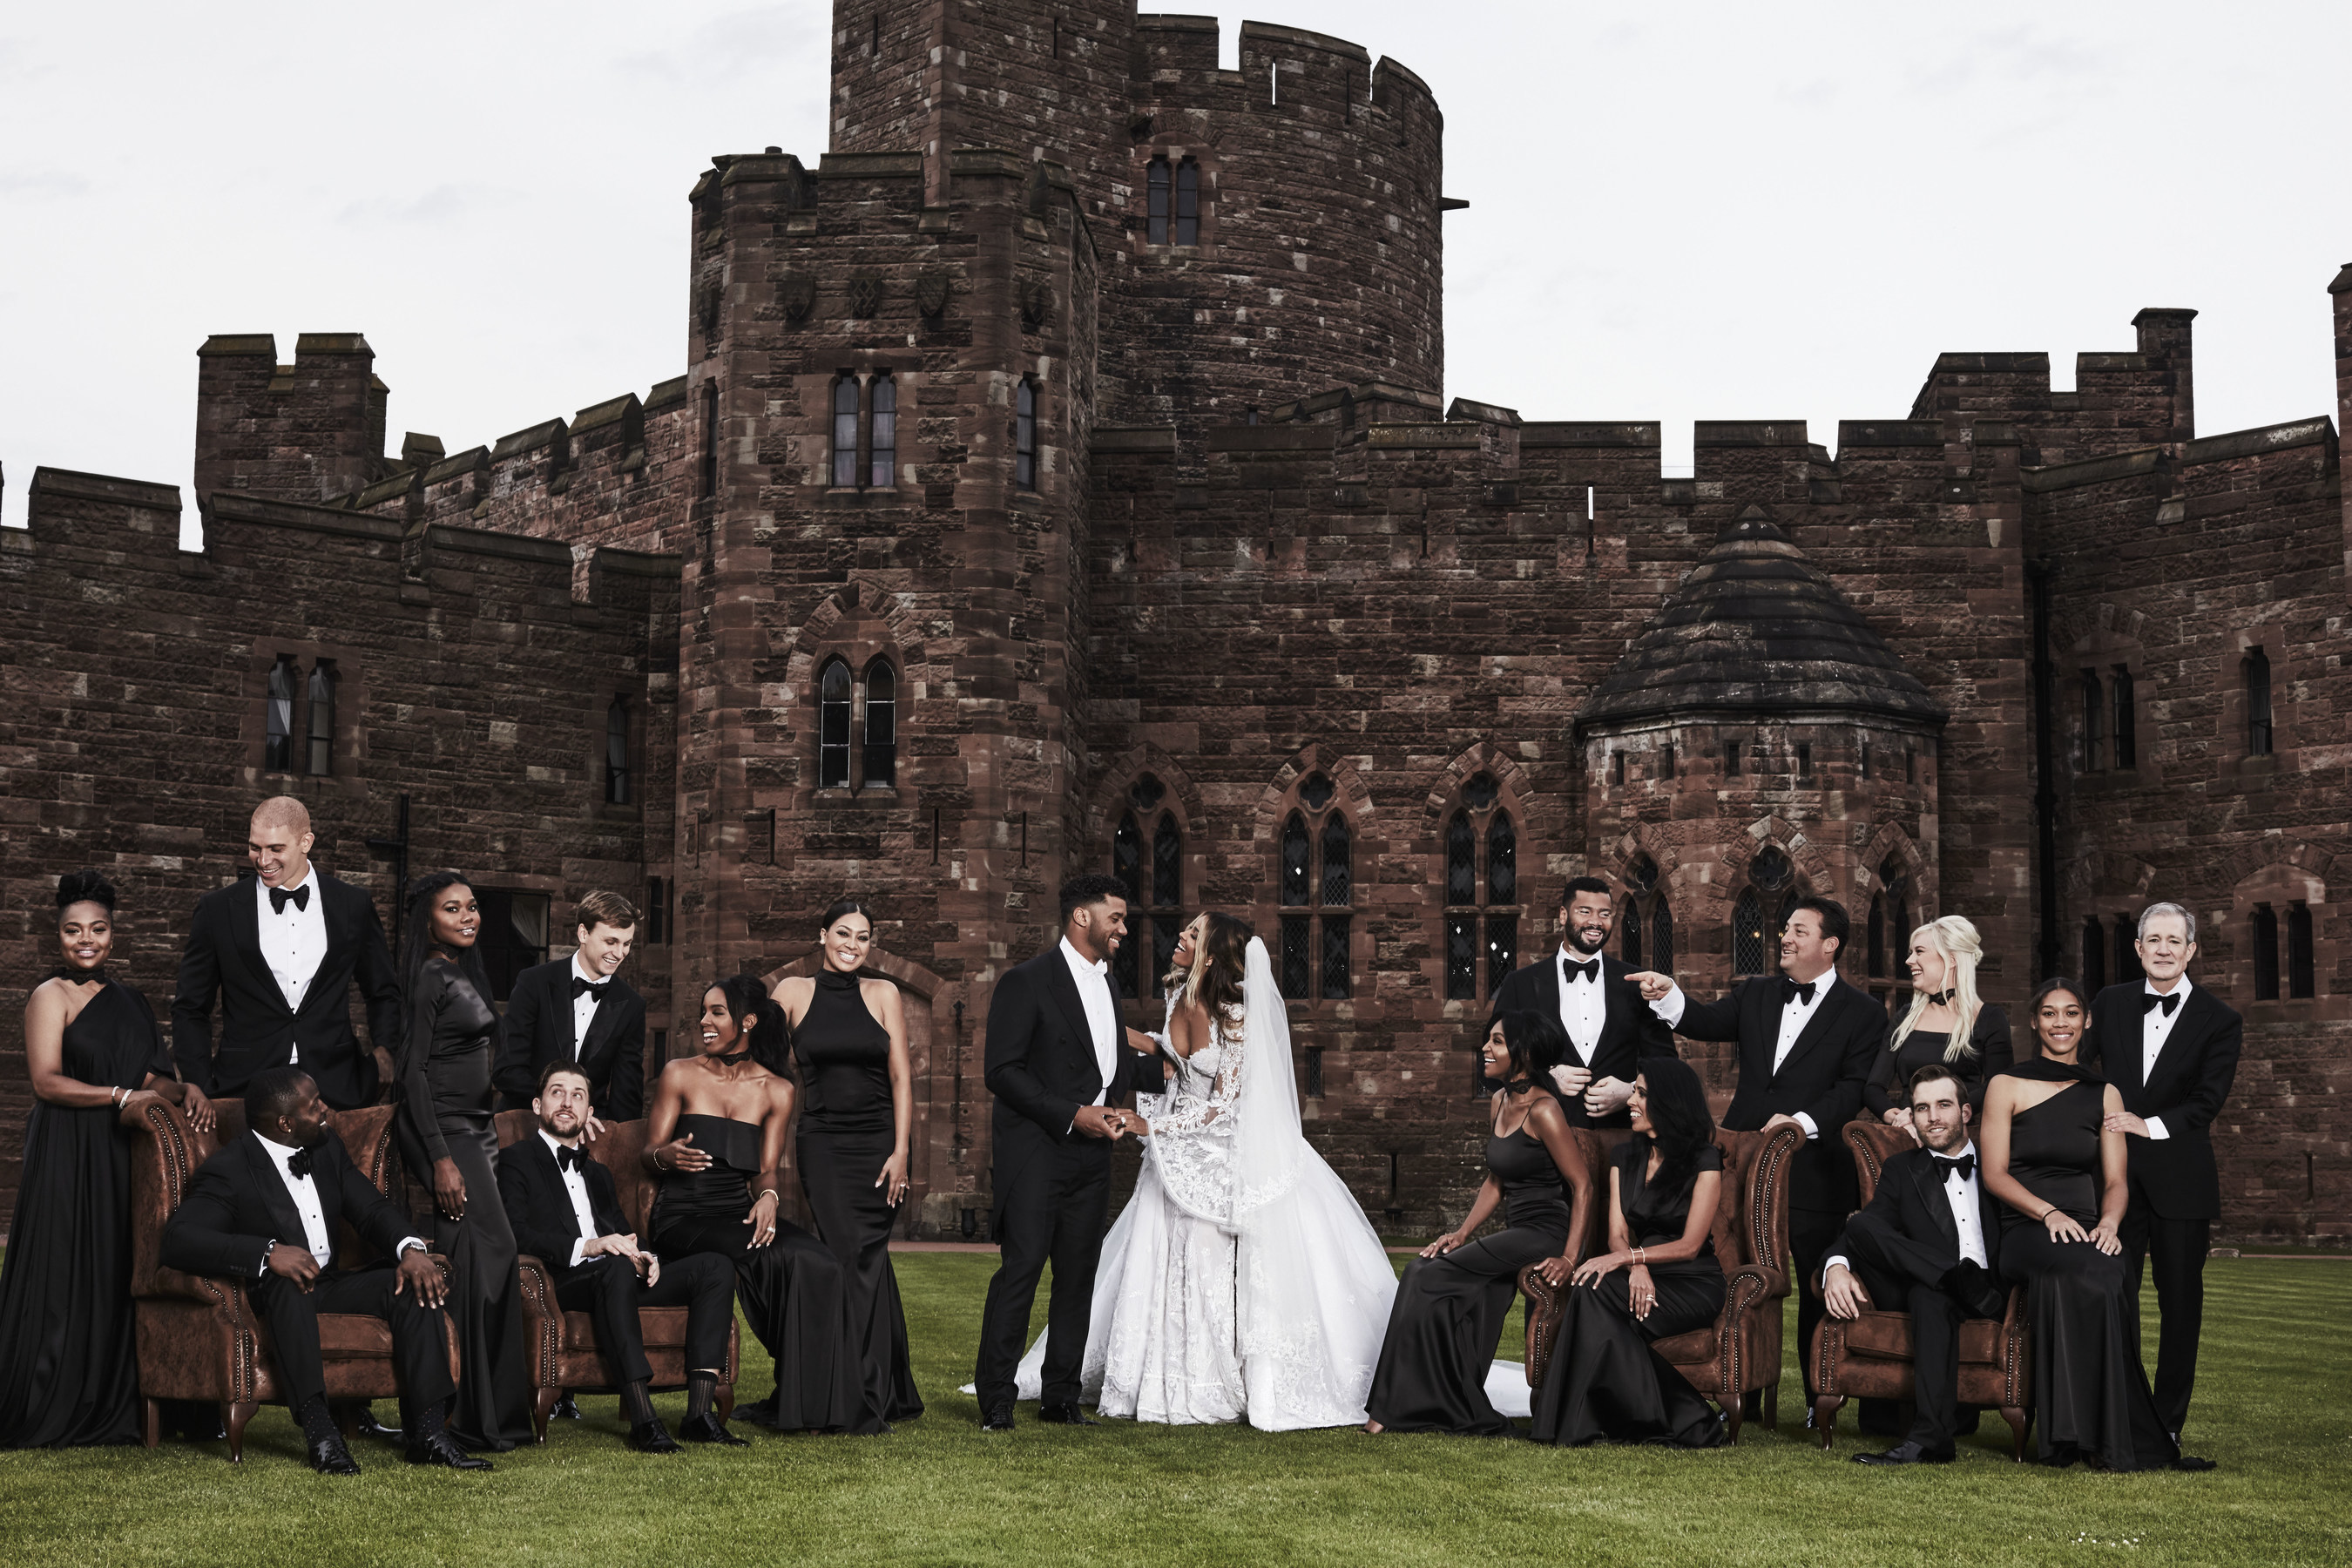 Ciara & Russell Wilson Wedding Party